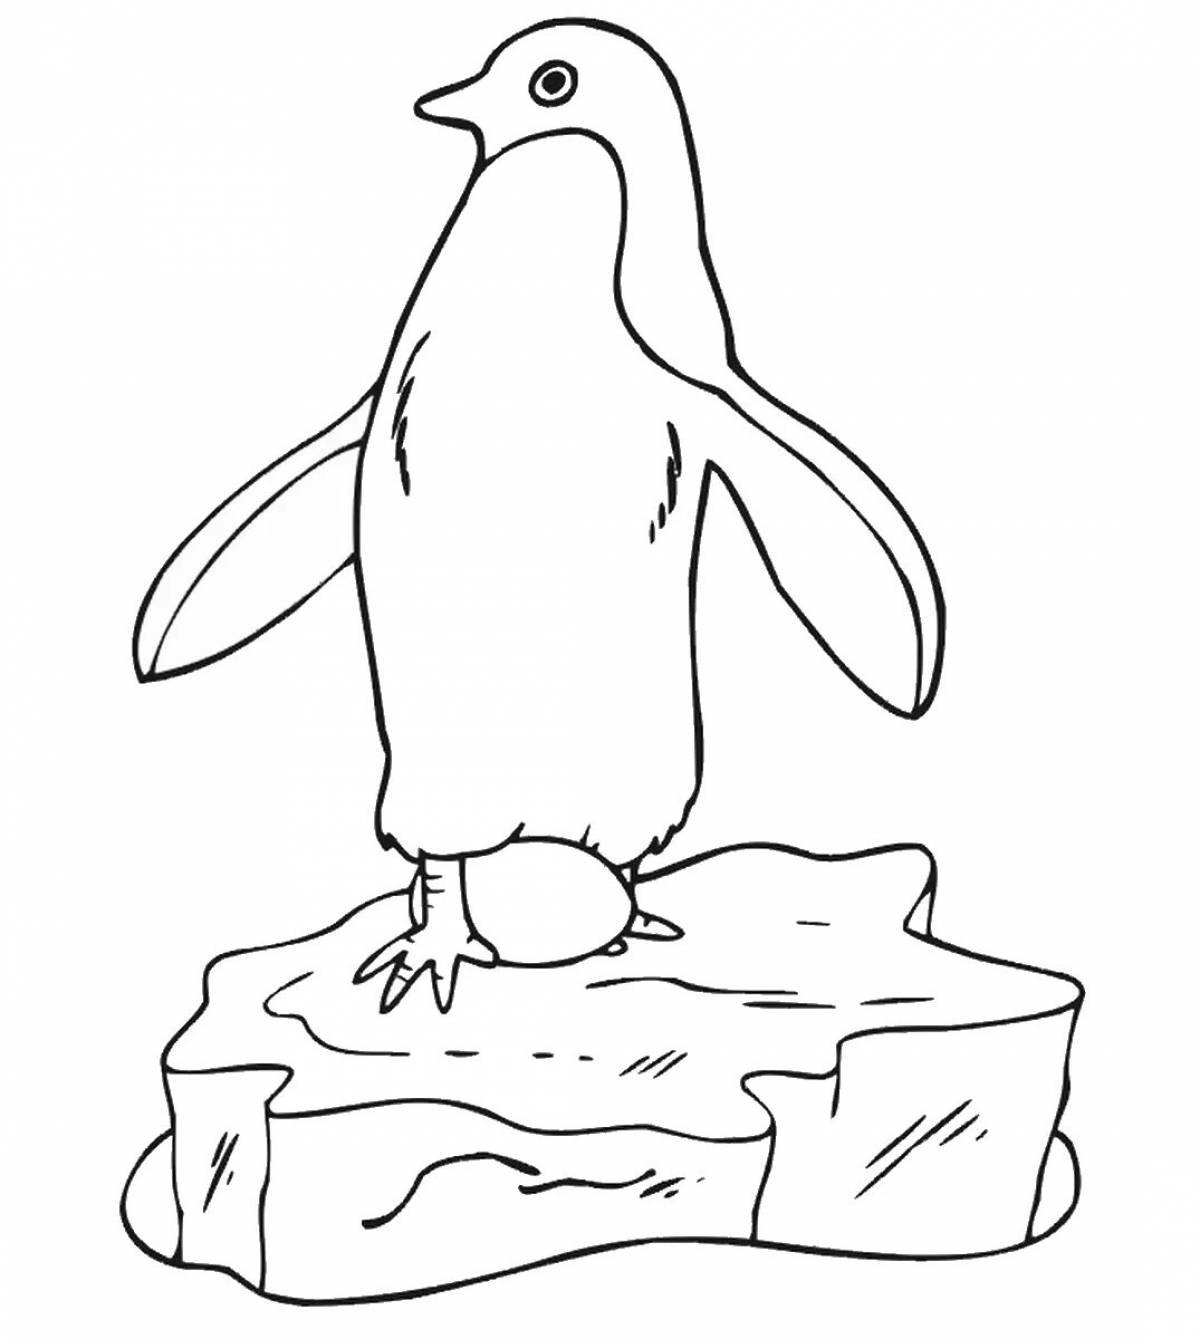 Shiny penguin on an ice floe coloring pages for kids